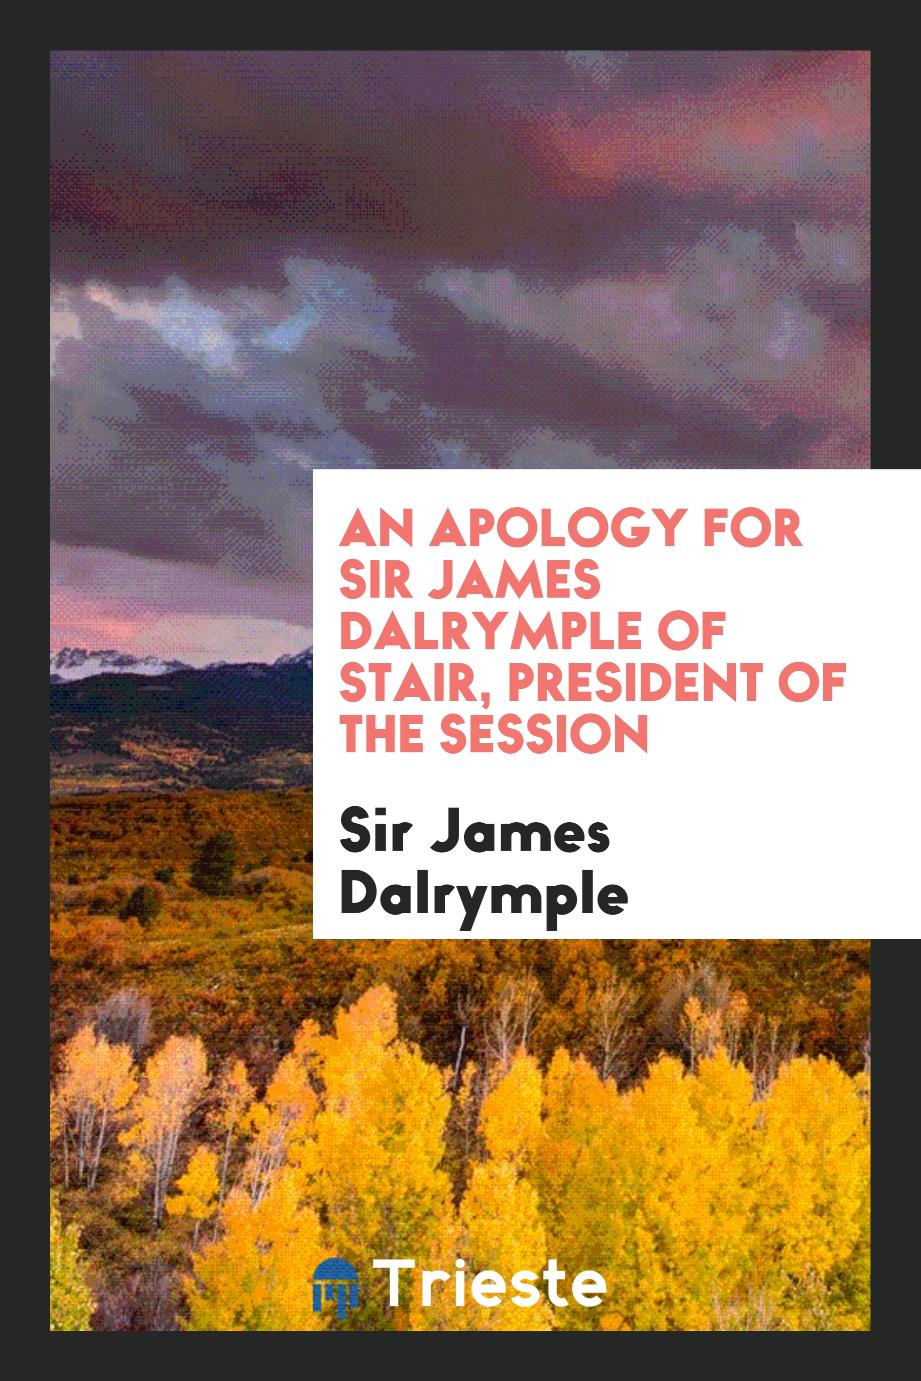 An Apology for Sir James Dalrymple of Stair, President of the Session